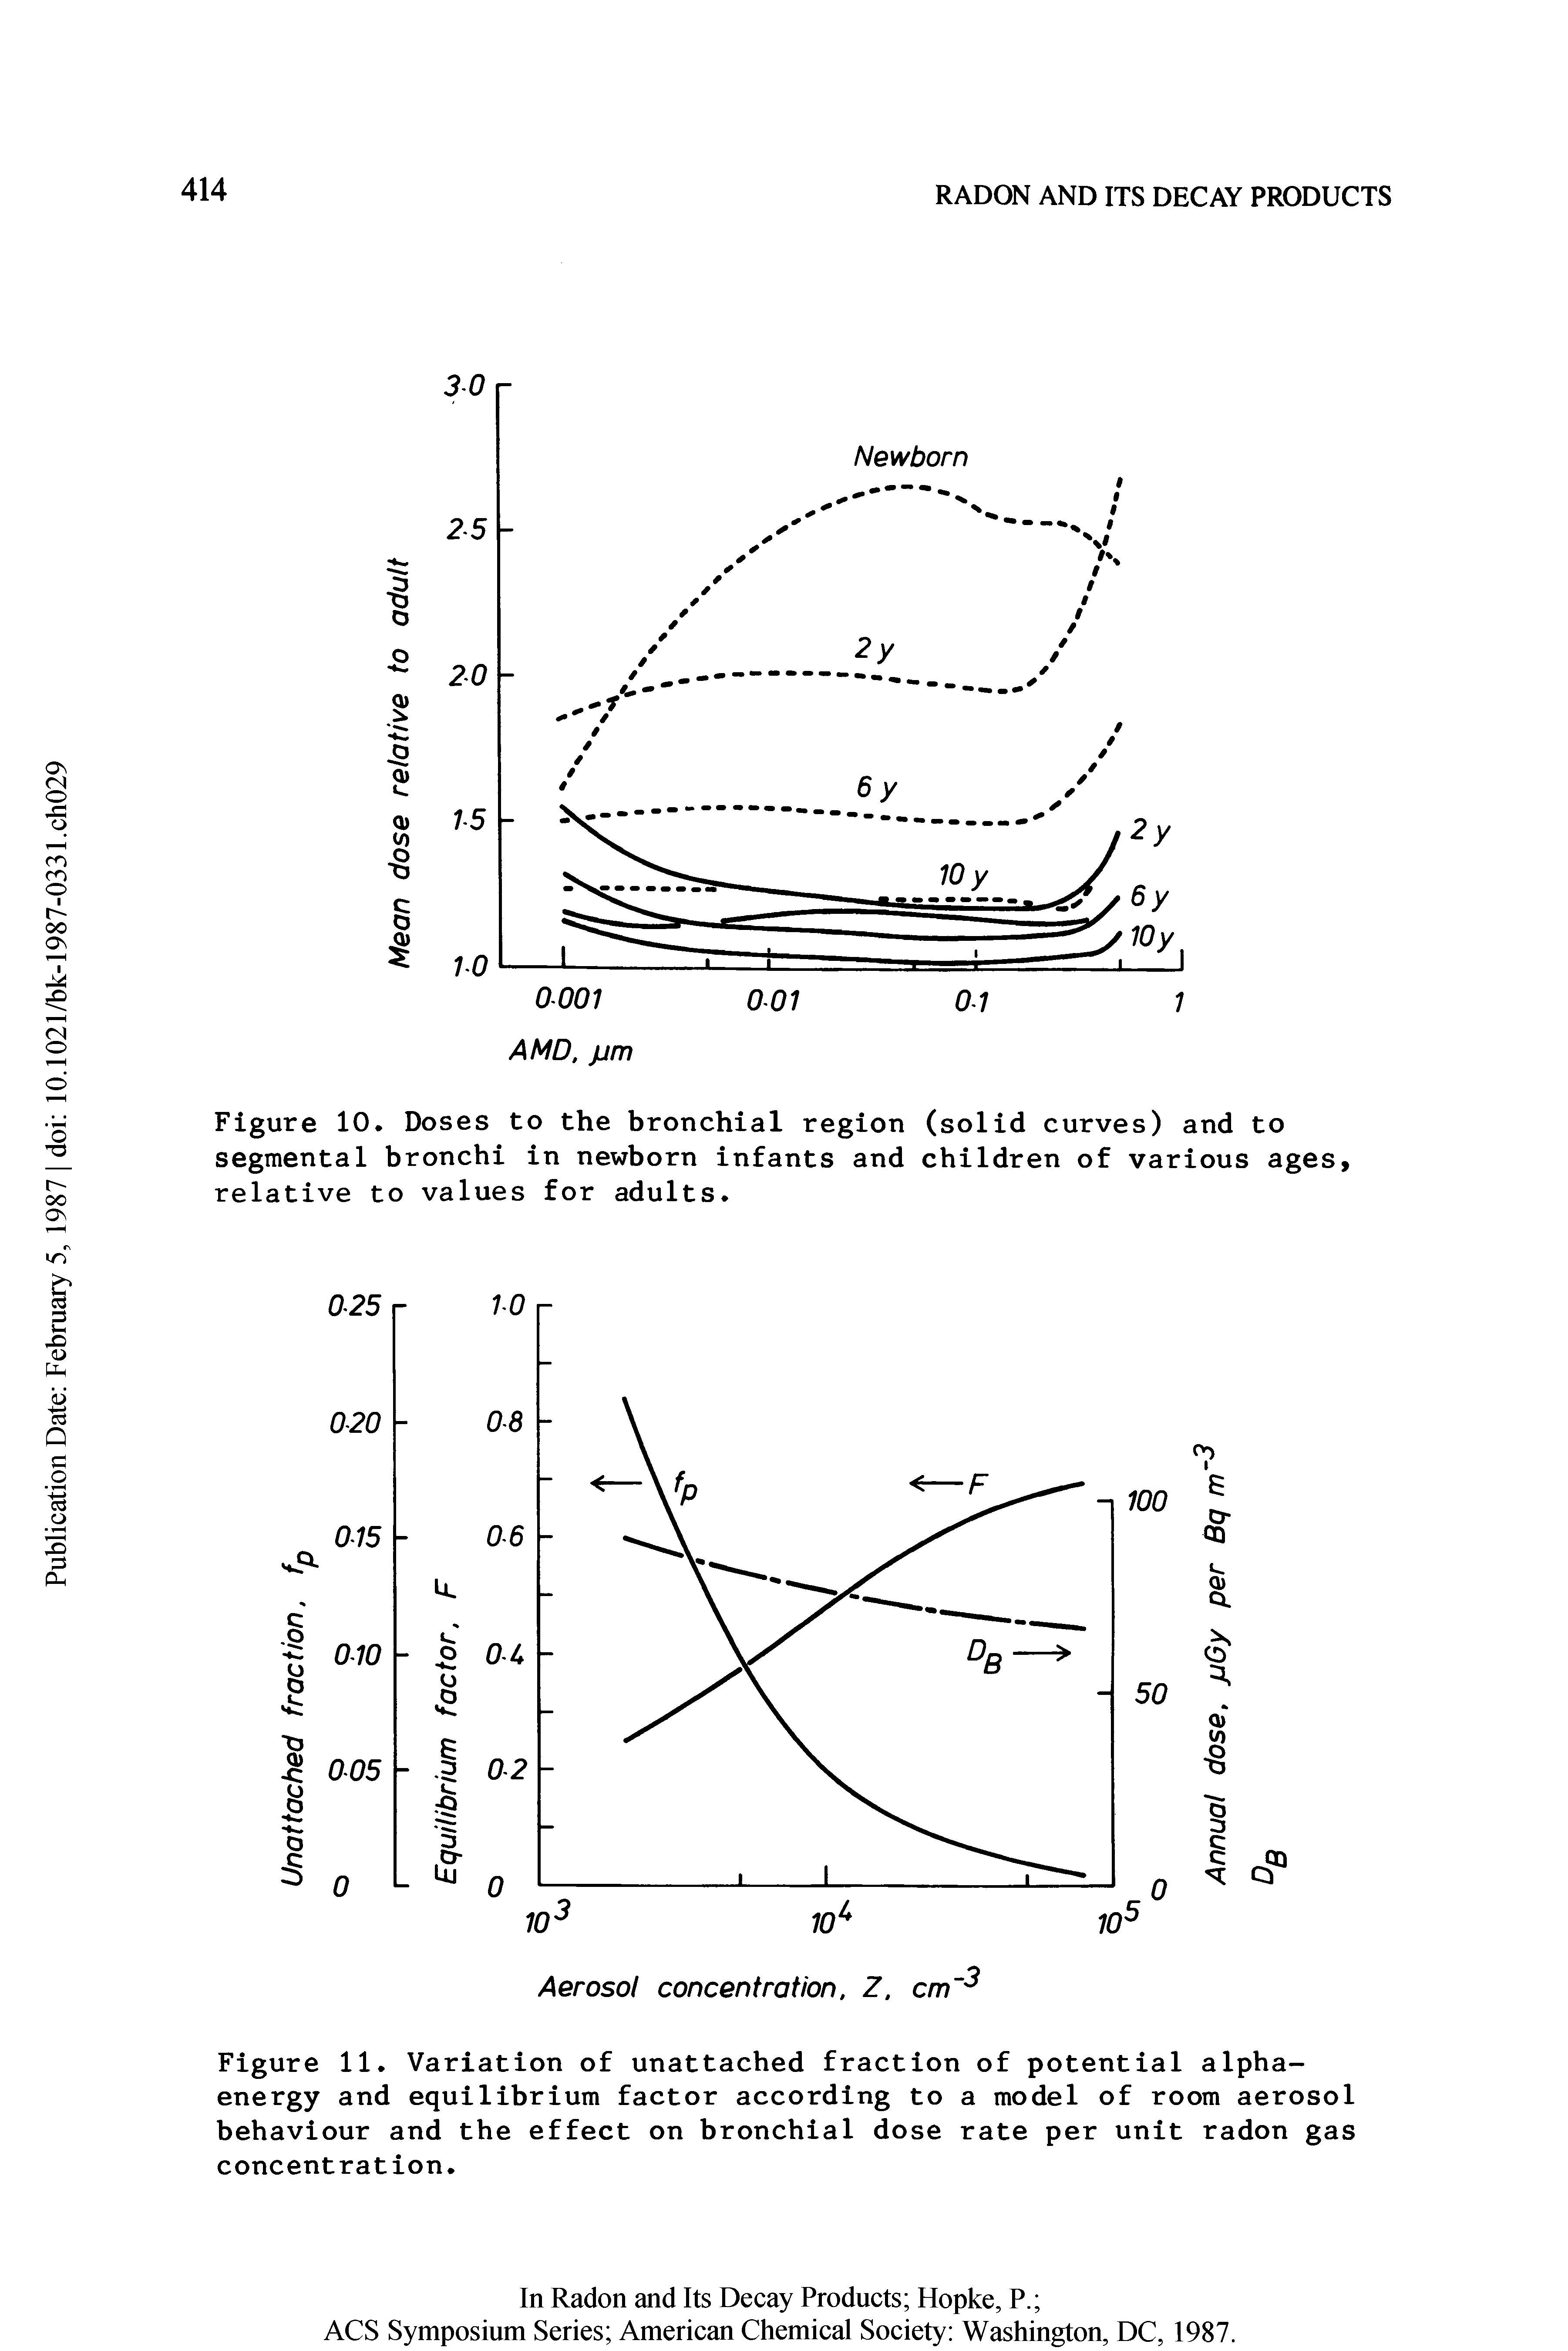 Figure 11. Variation of unattached fraction of potential alpha-energy and equilibrium factor according to a model of room aerosol behaviour and the effect on bronchial dose rate per unit radon gas concentration.